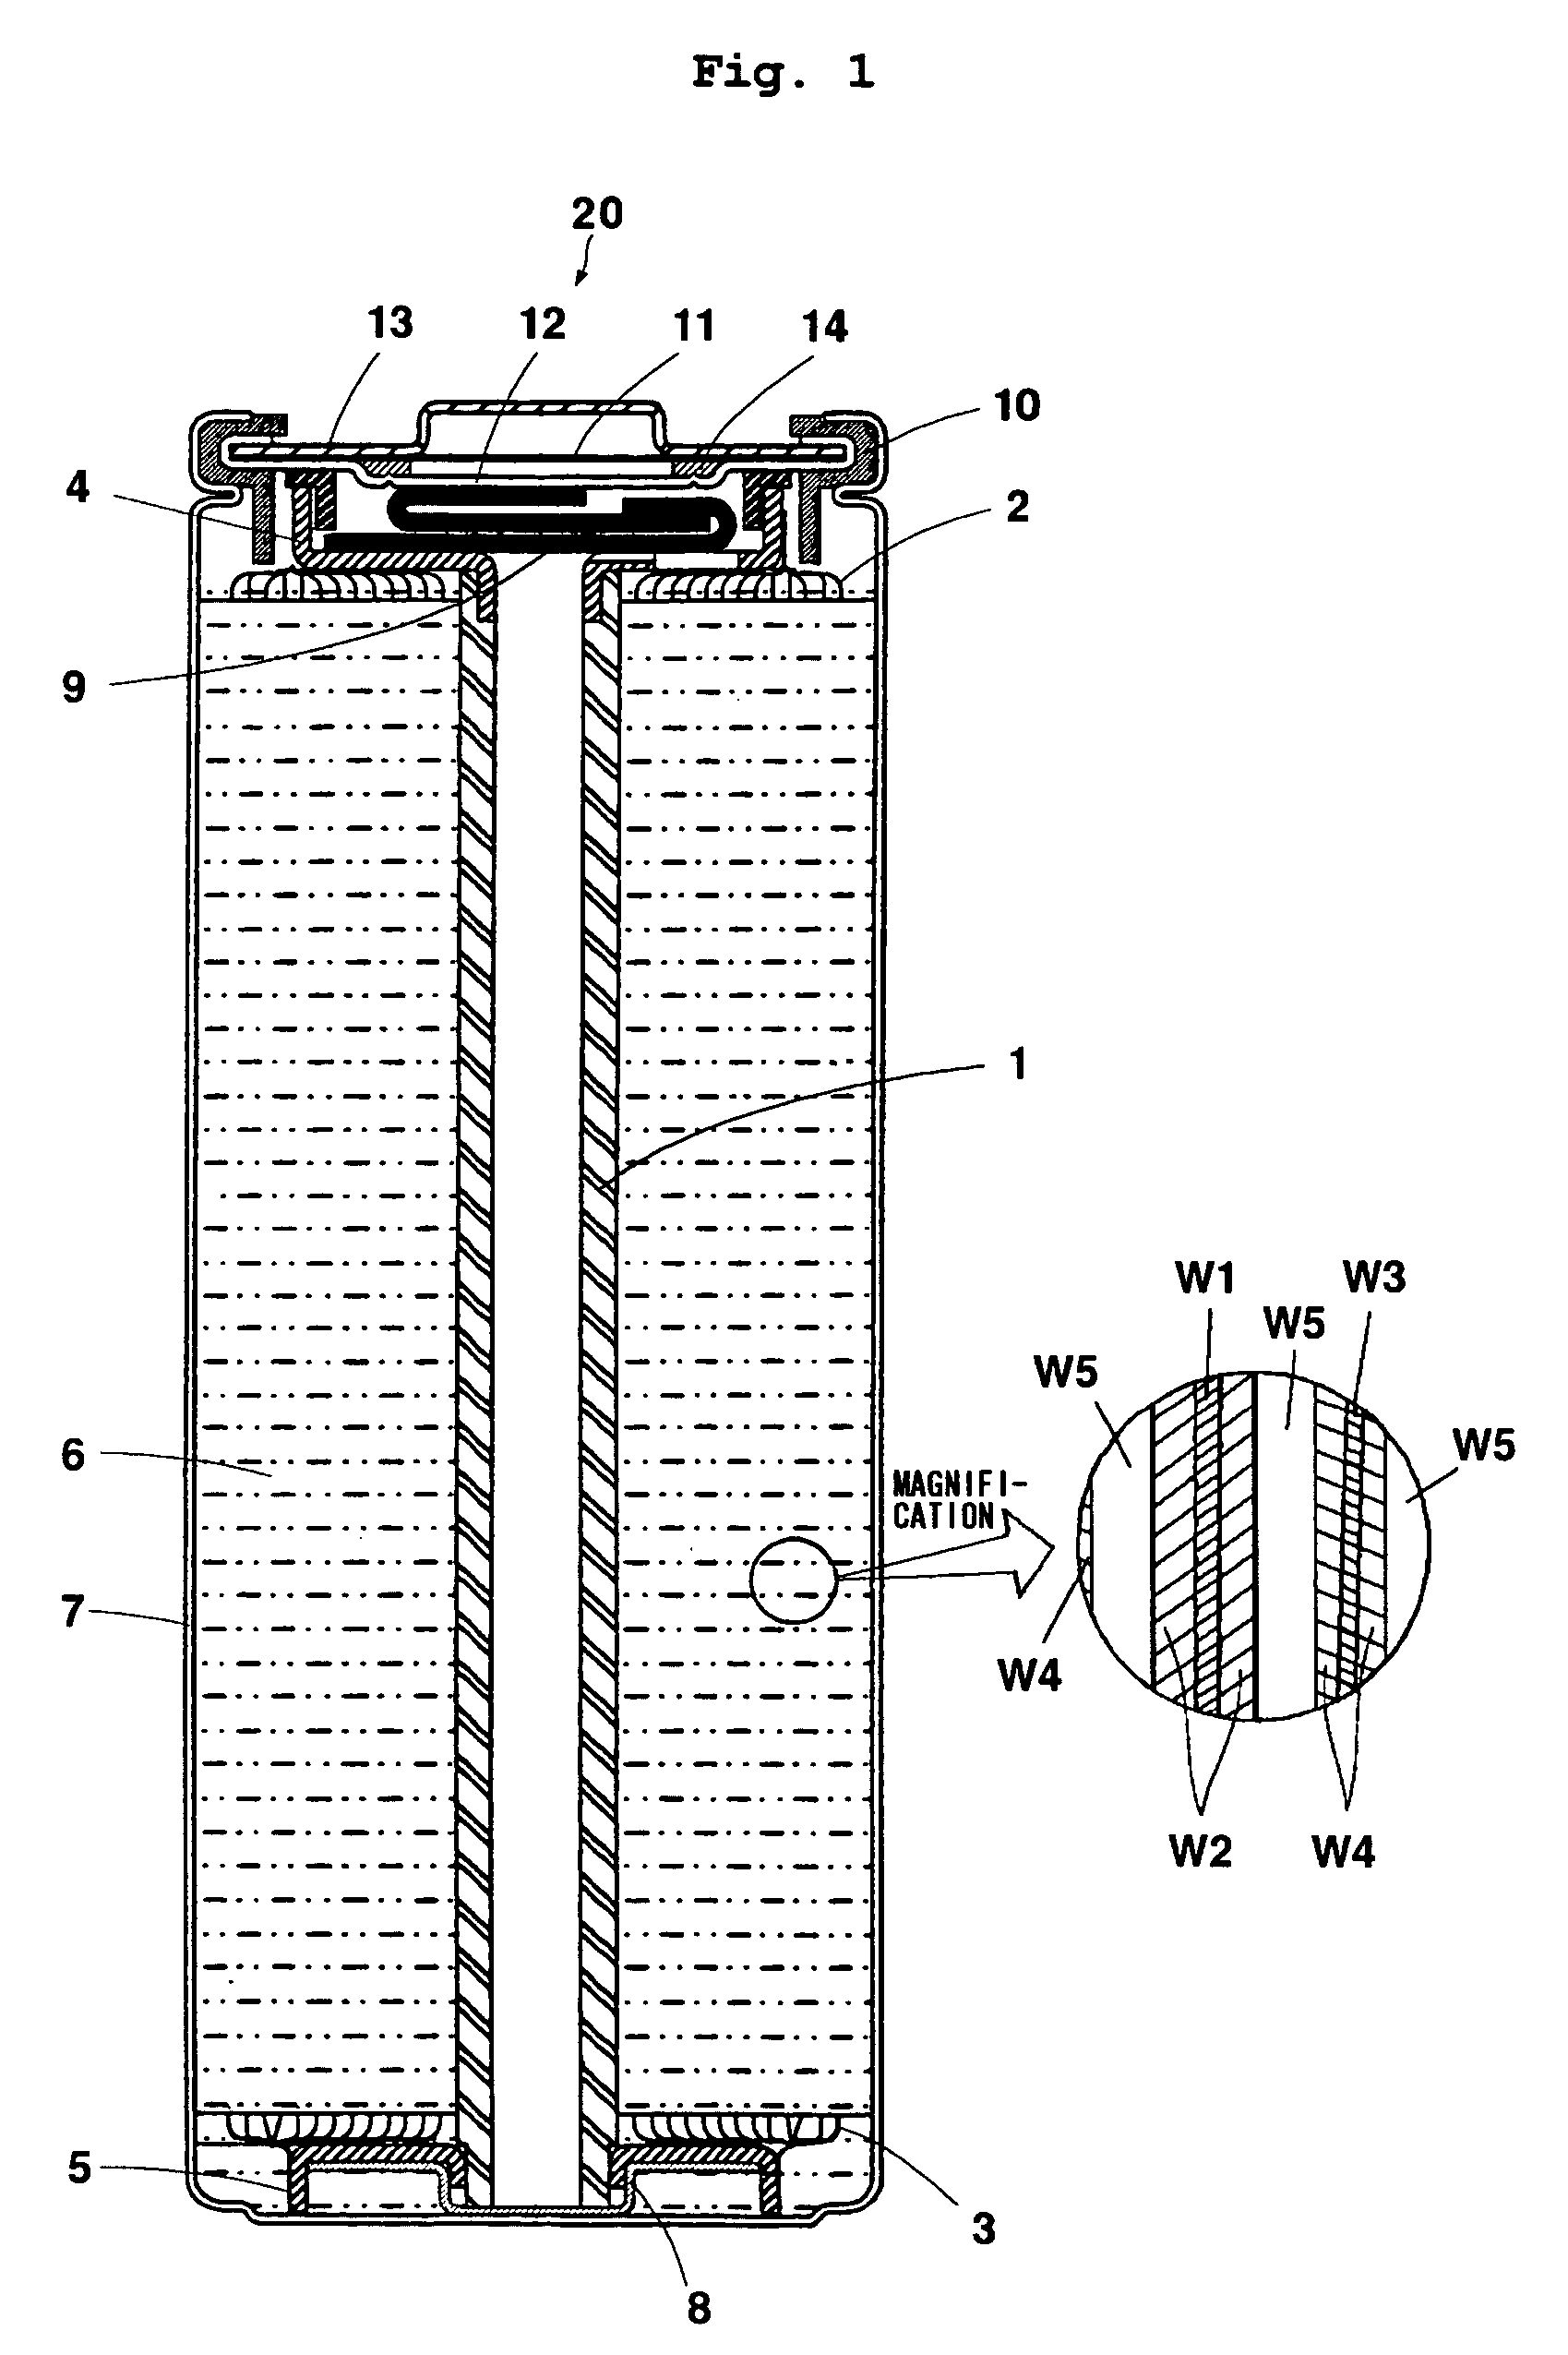 Positive electrode active material including a lithium transition metal complex oxide and an oxide of a dissimilar element